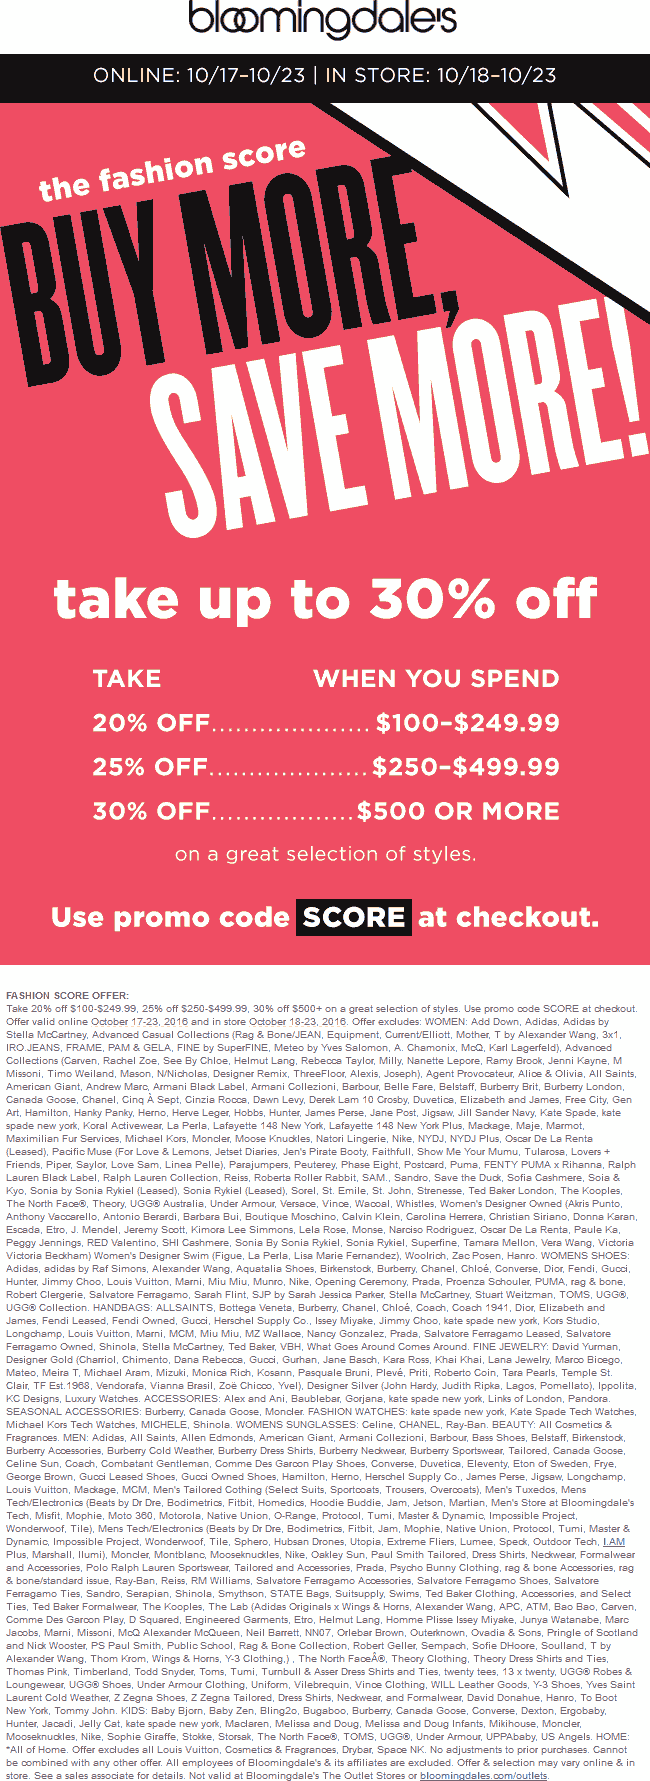 Bloomingdales Coupons ???? Shopping Deals & Promo Codes December 2019